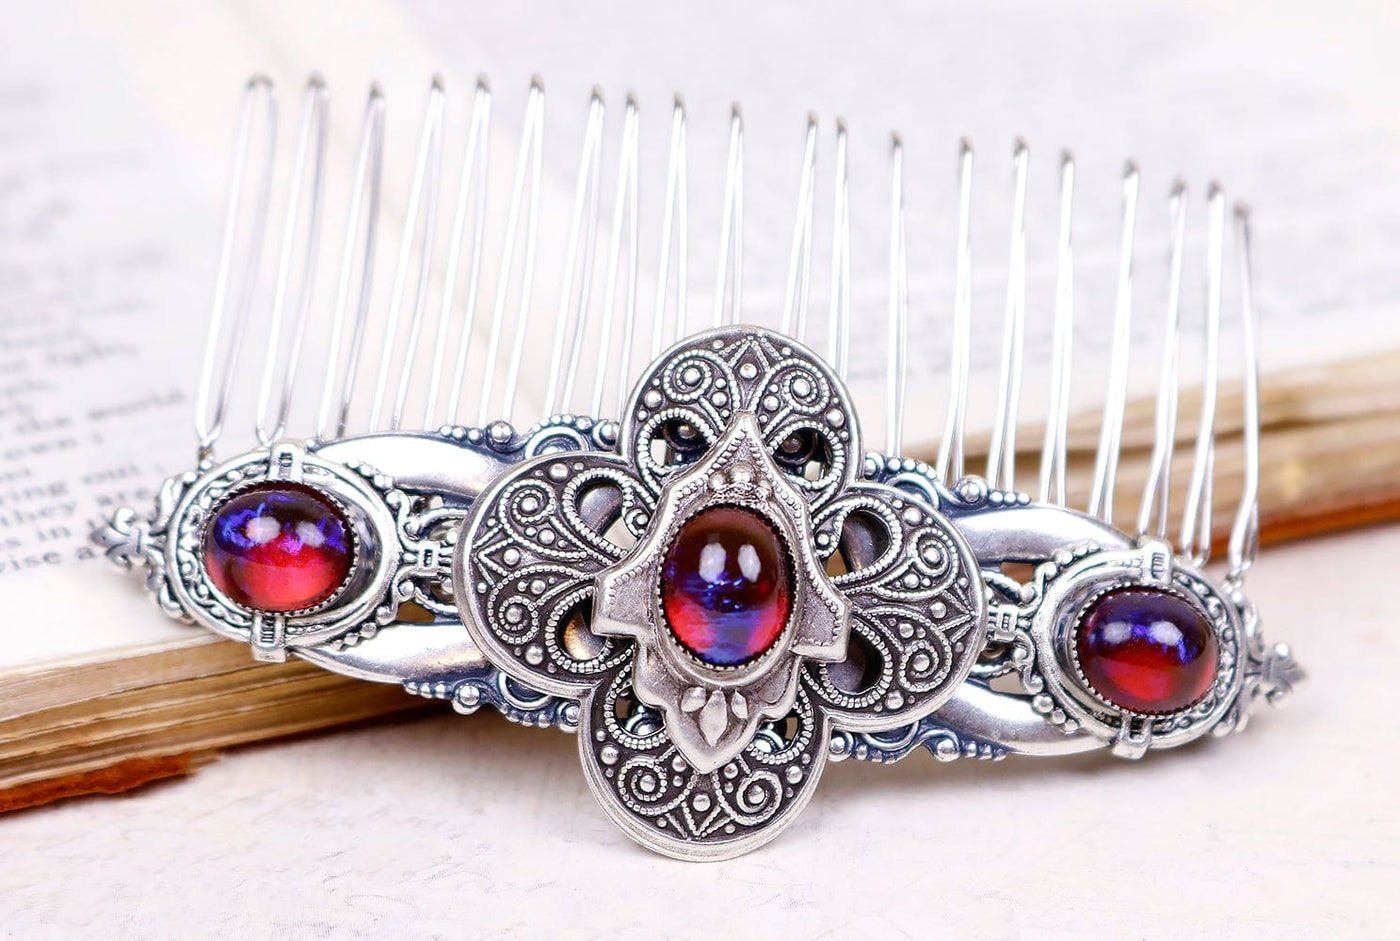 Avebury Comb in Dragon's Breath Opal and Antiqued Silver by Rabbitwood and Reason